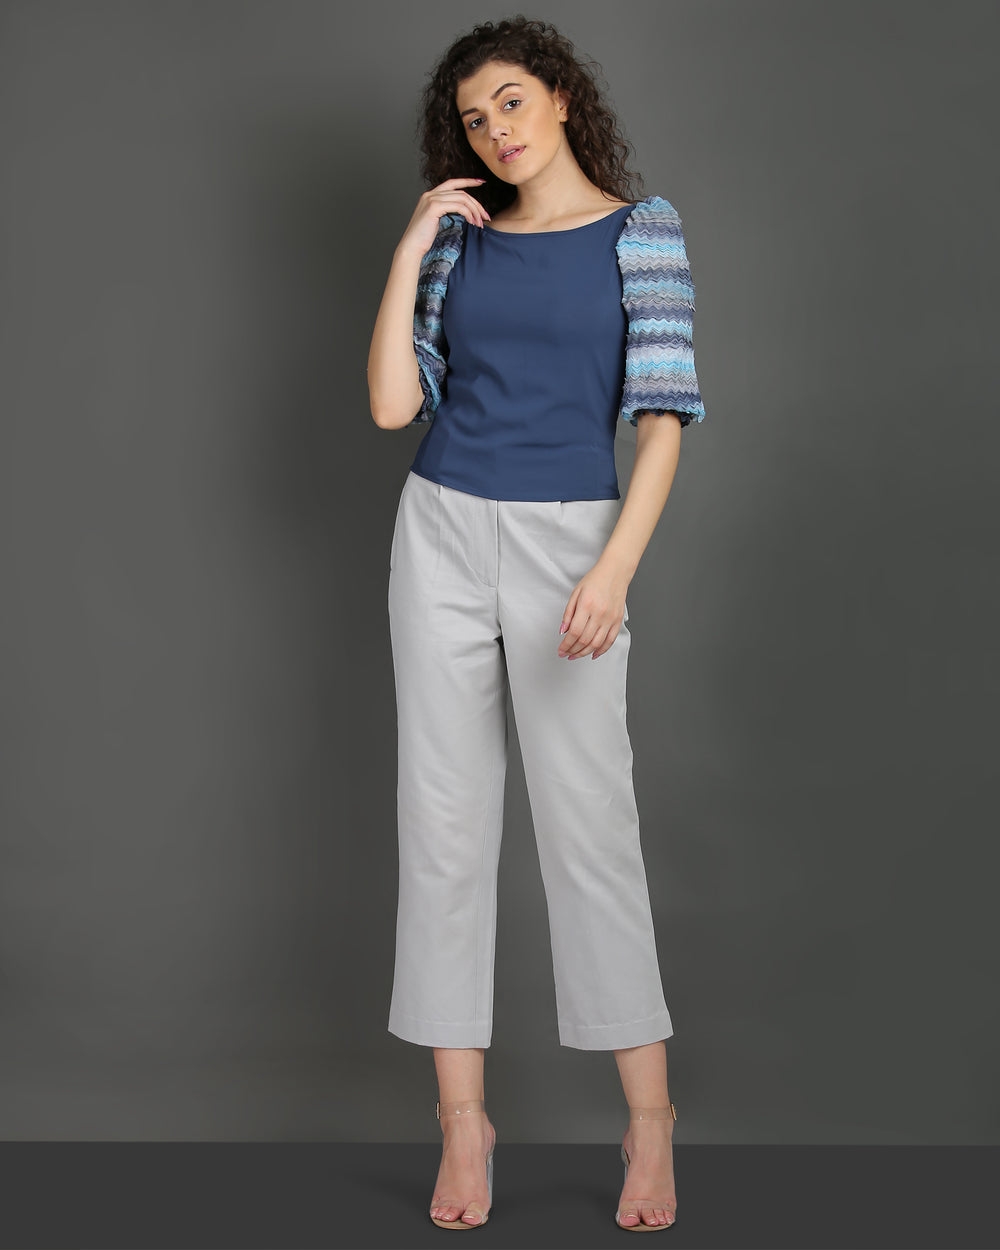 Harold Meagan | Puffed-Sleeved Blouse and Grey Cropped Wide-Leg Pants